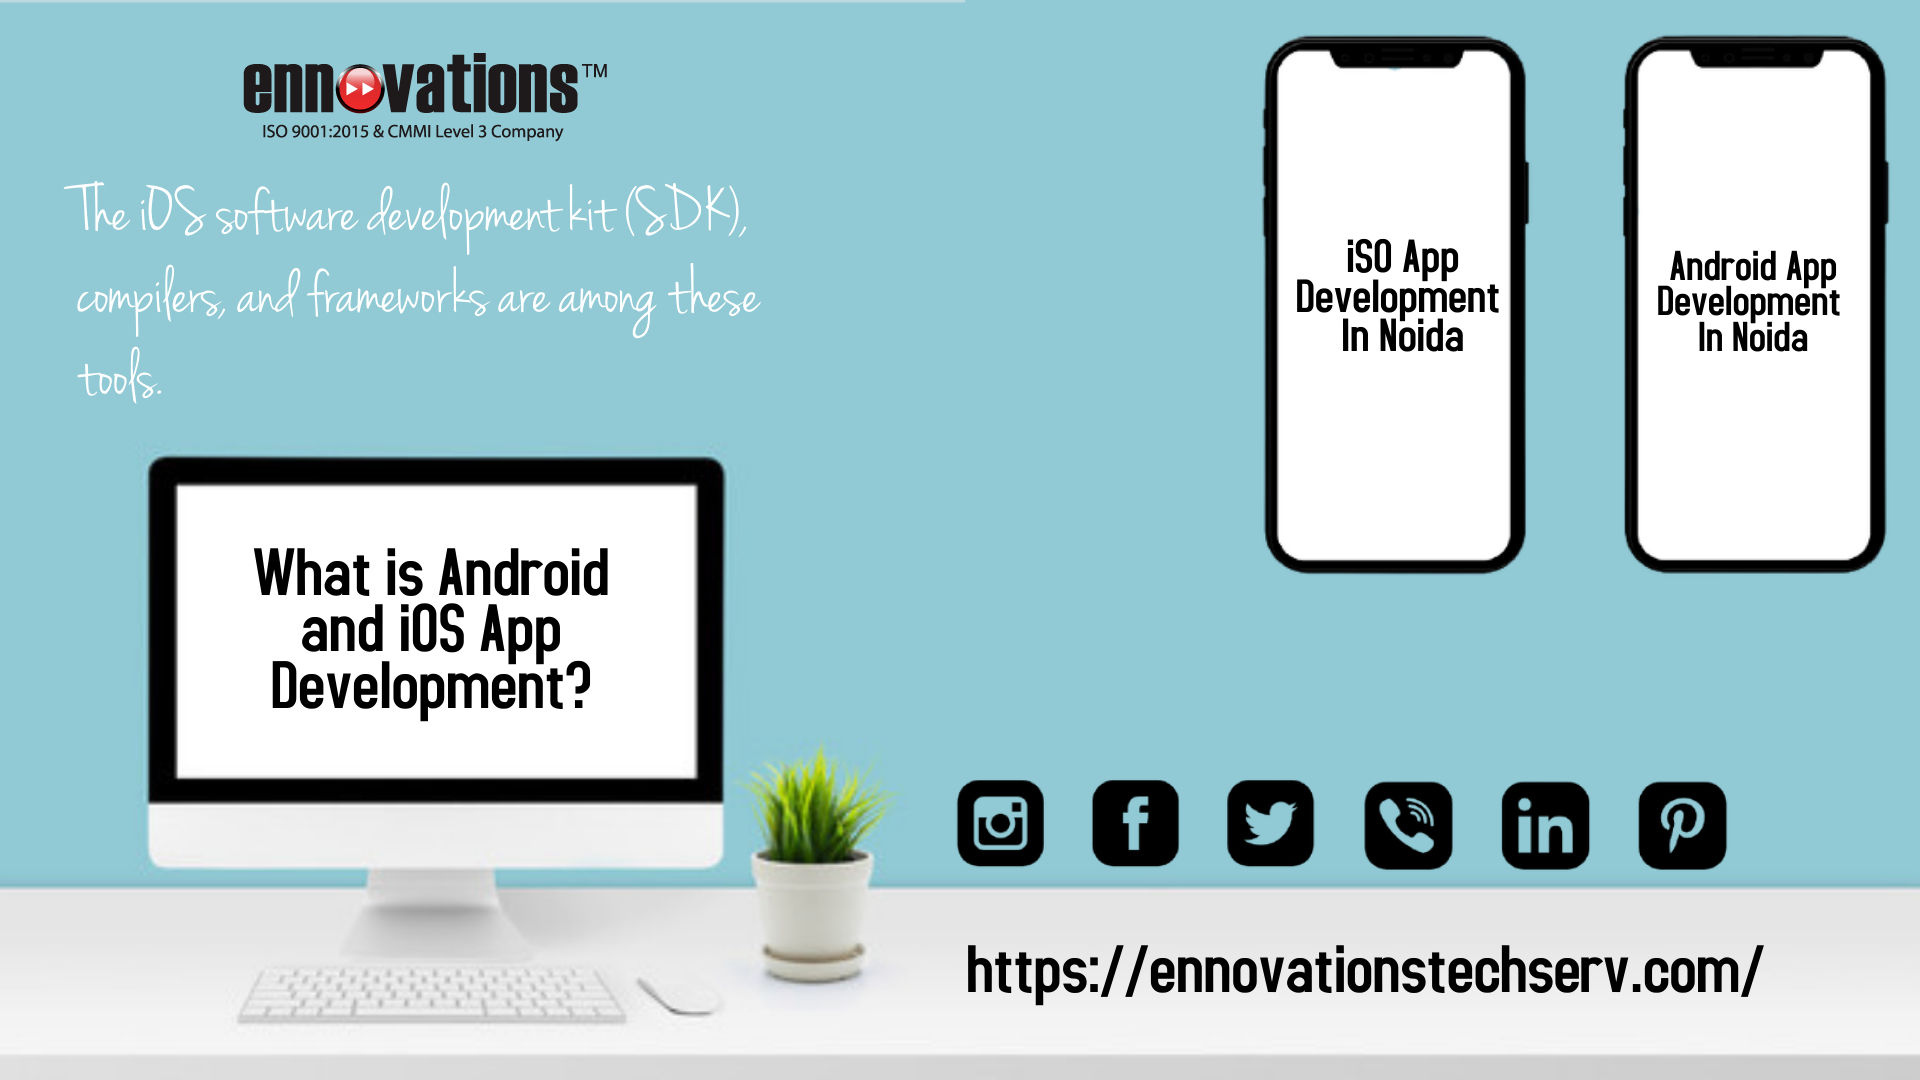 What is Android and iOS App Development